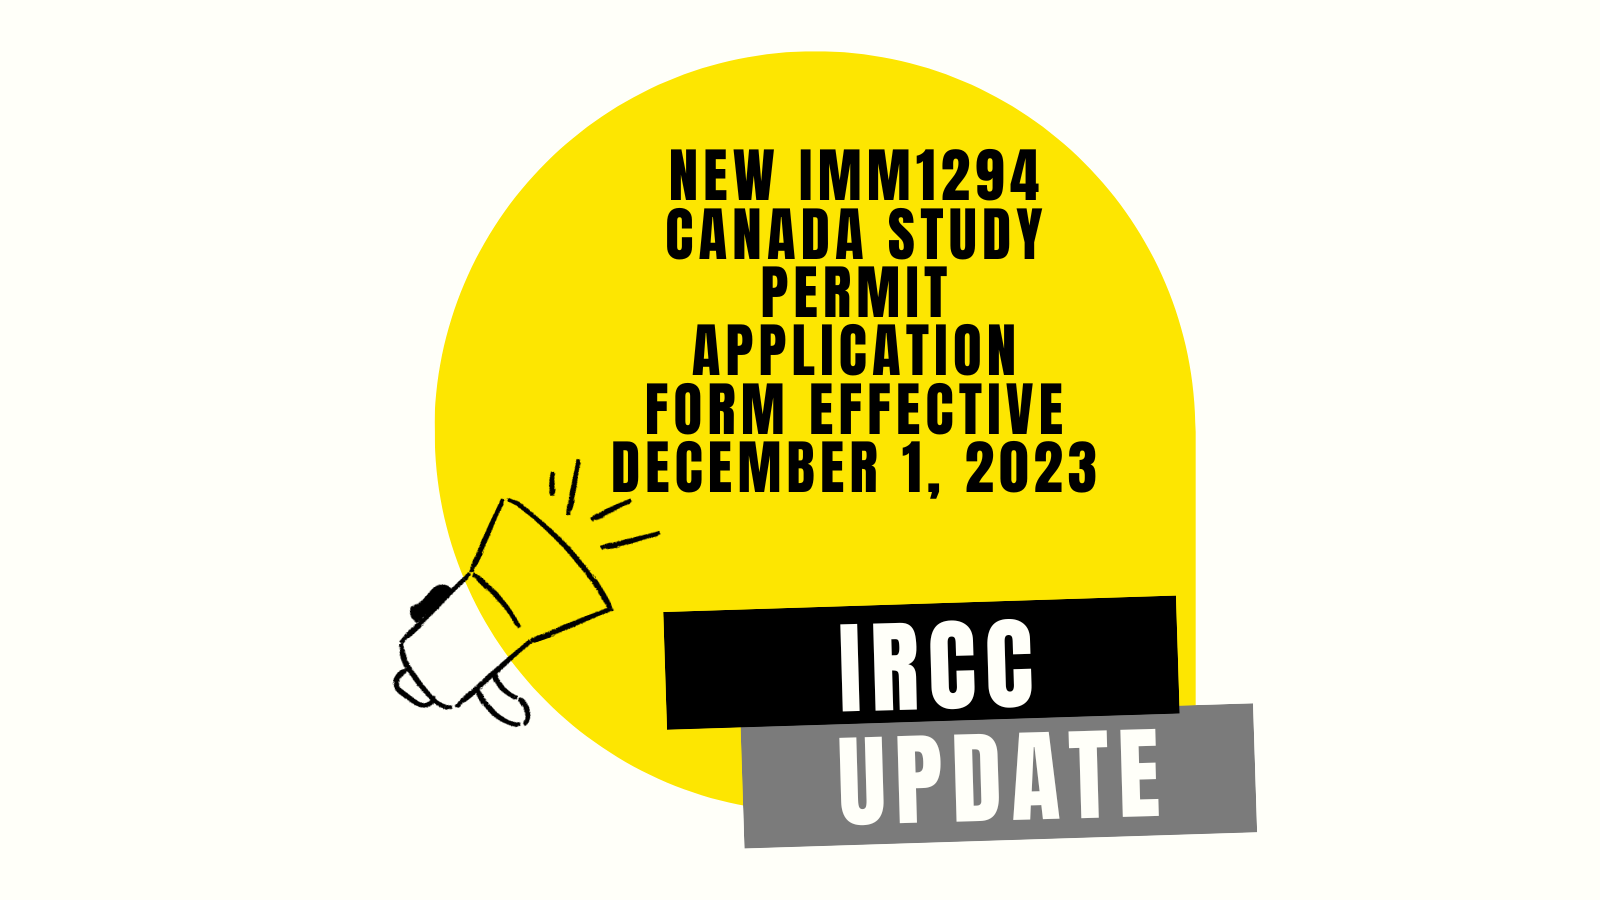 New IMM1294 Canada Study Permit Application Form Effective December 1, 2023